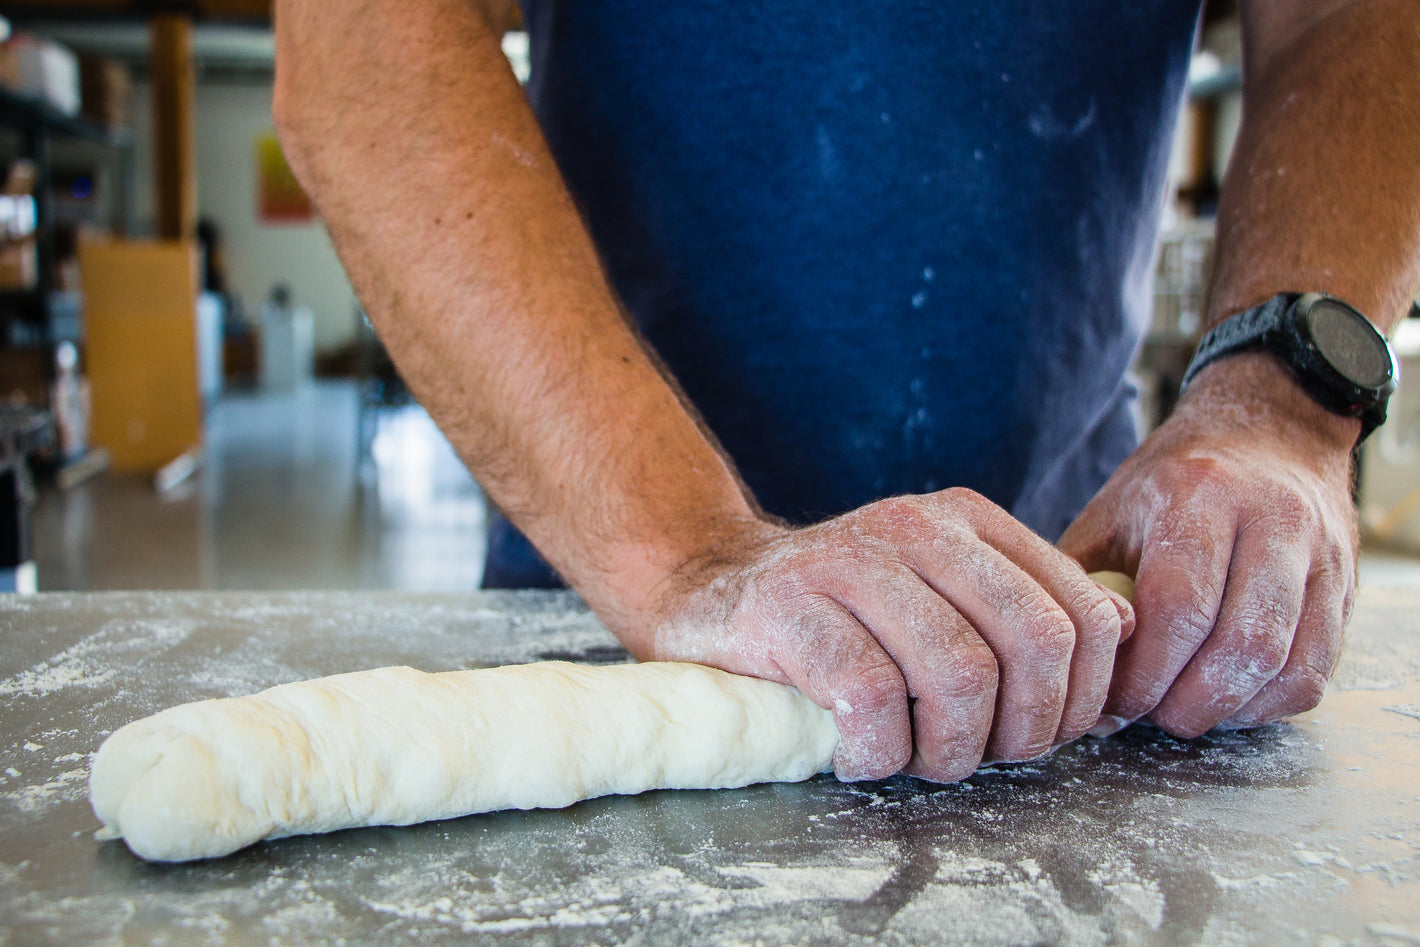 Working the dough traditionally